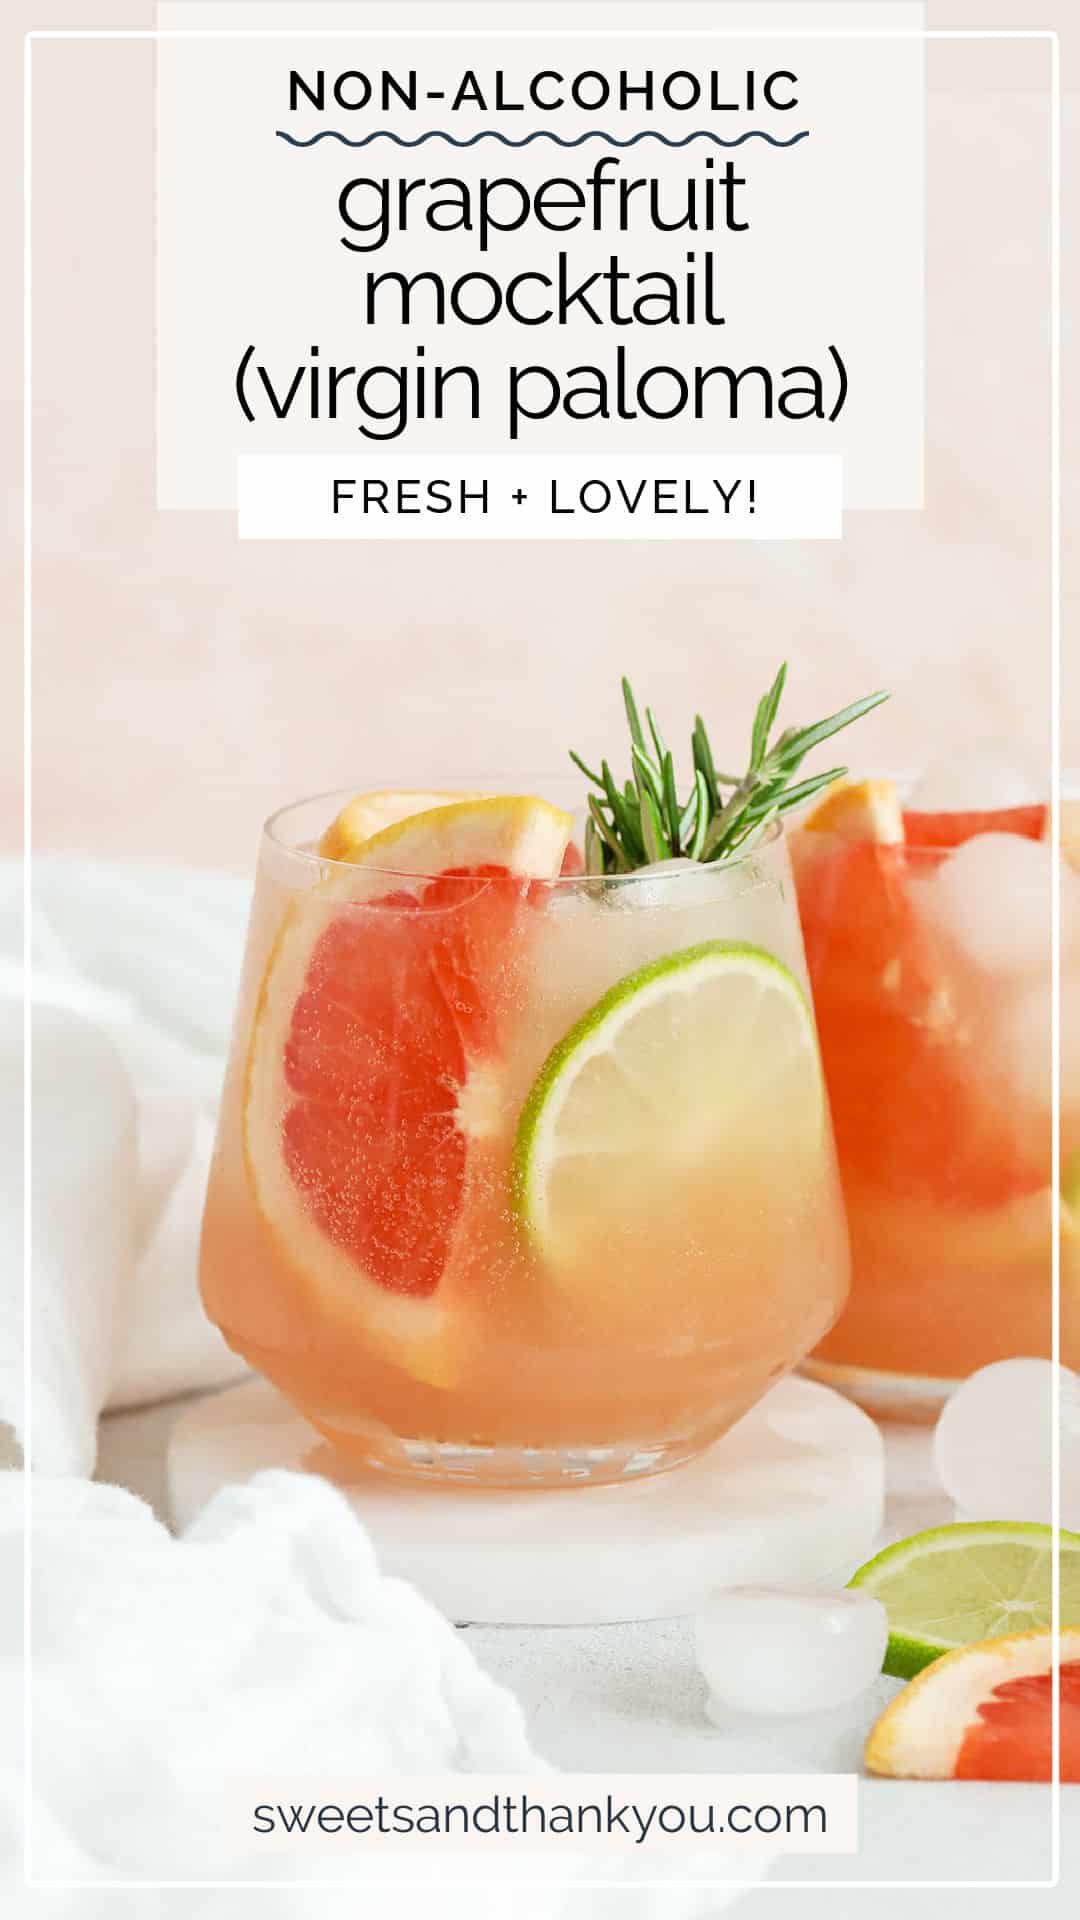 Grapefruit Mocktail (Virgin Paloma) - This non-alcoholic twist on a paloma is the perfect blend of citrus and sparkle. You'll love the fresh, bright flavor! // virgin paloma recipe / grapefruit mocktail recipe / non-alcoholic paloma / non-alcoholic grapefruit drink recipe / easy mocktail recipe / citrus mocktail / holiday mocktail / christmas mocktail / winter mocktail / new years eve mocktail / party mocktail / non-alcoholic party drink / pink mocktail / pink grapefruit mocktail